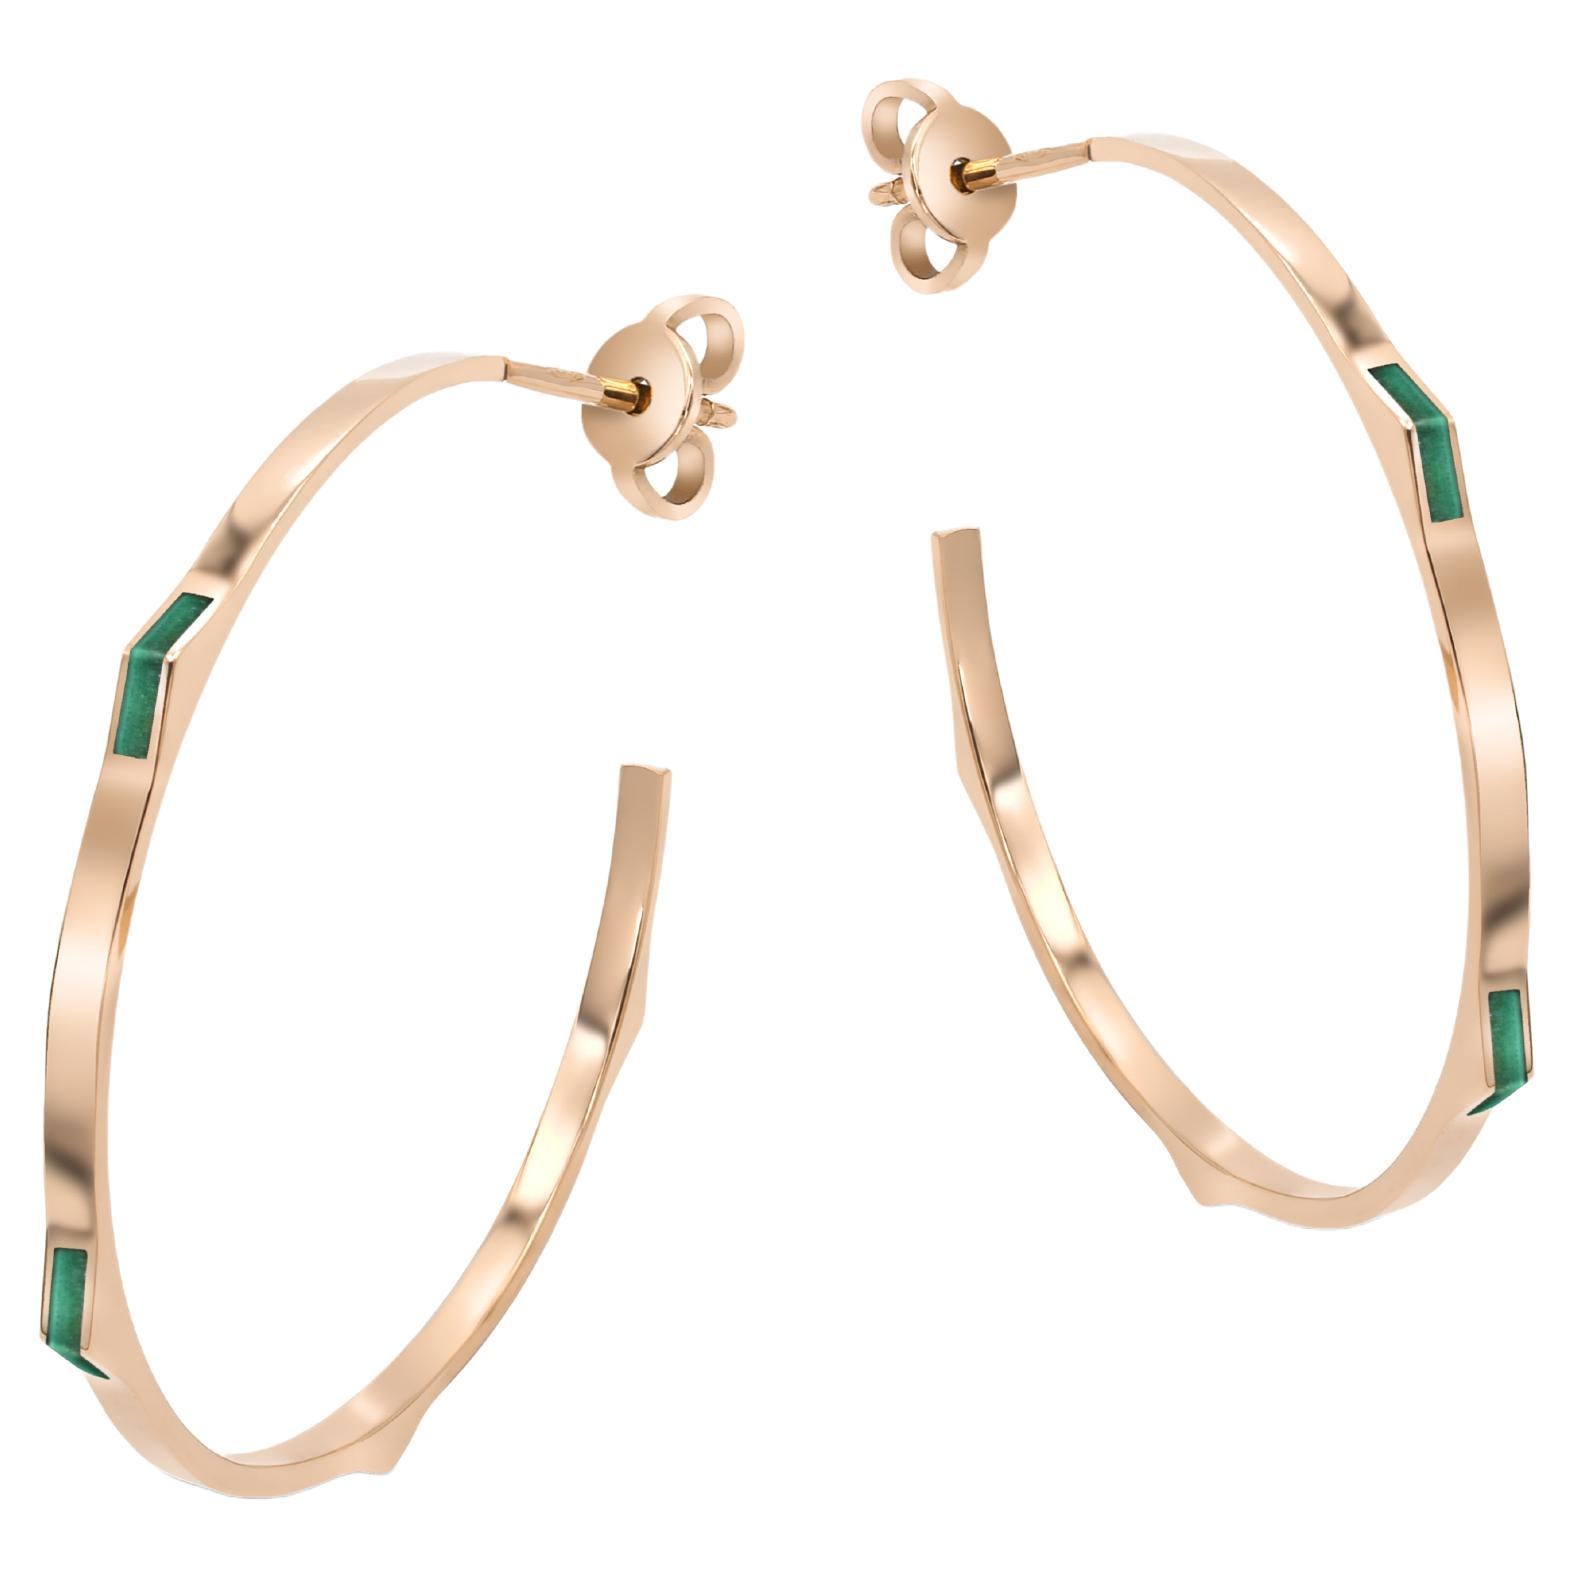 Mattioli Eve_r New Earrings in Rose Gold & Malachite For Sale